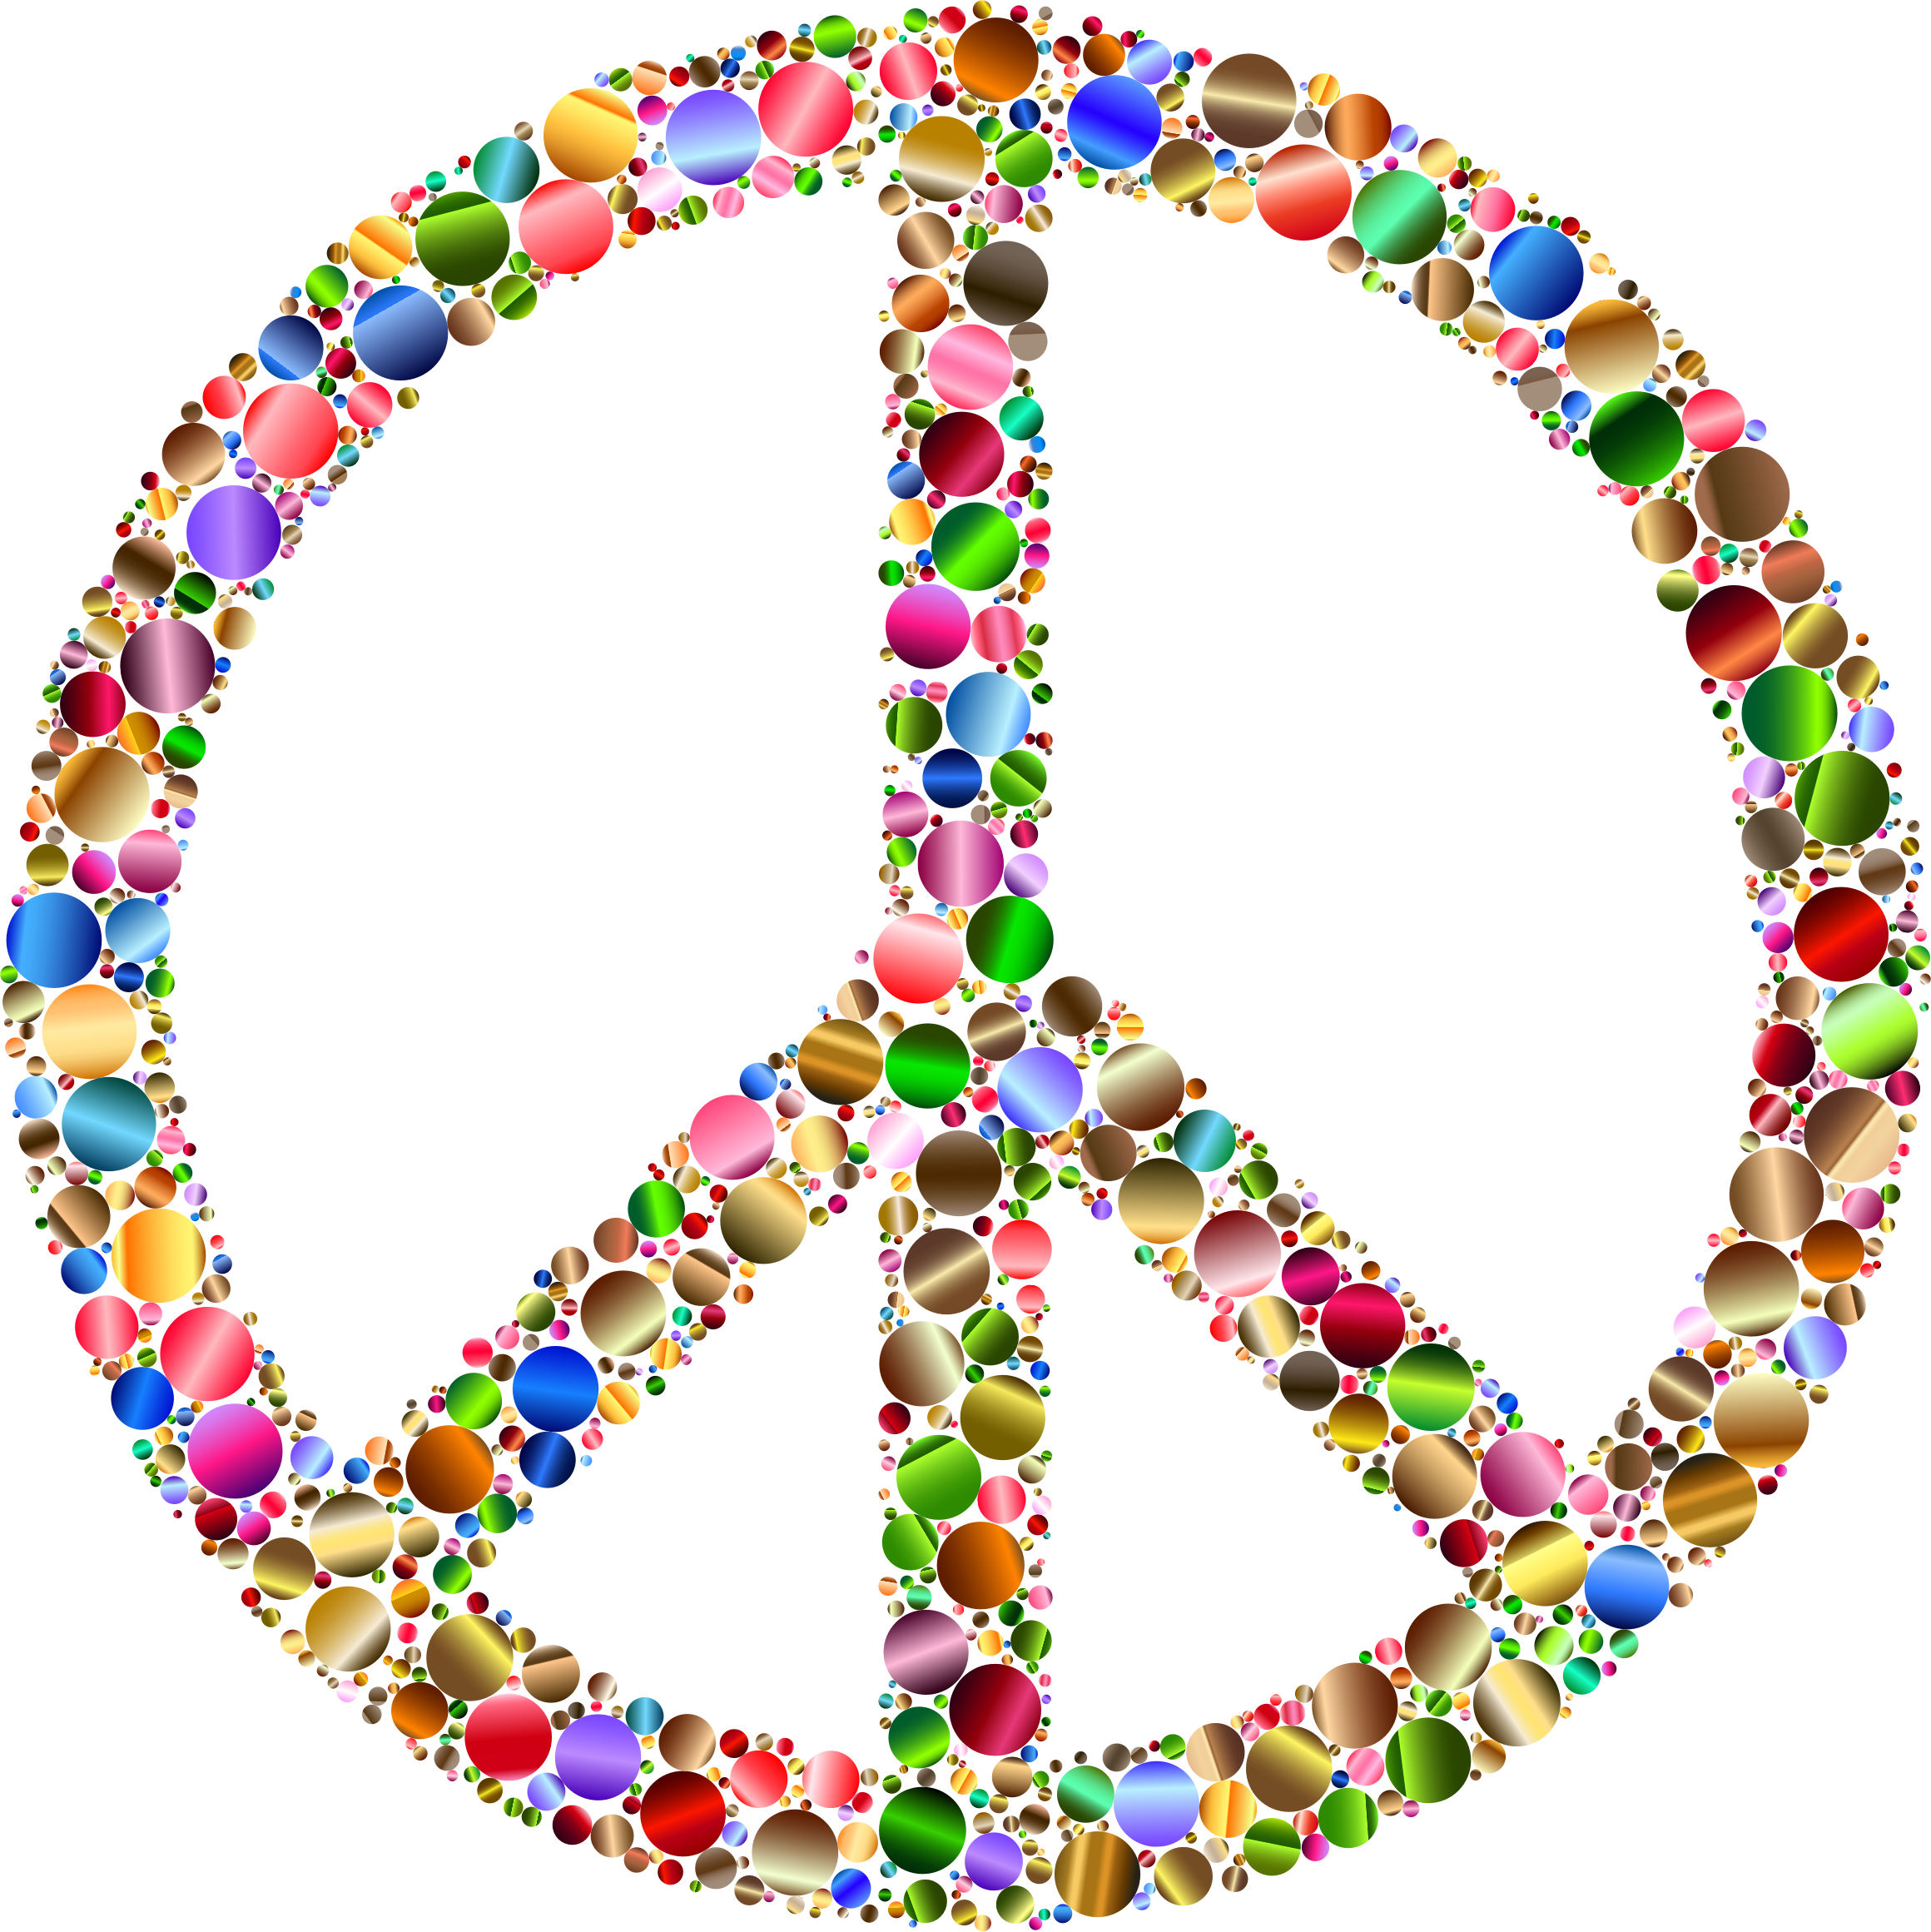 Colorful Circles Peace Sign 12 Variation 2 By Gdj